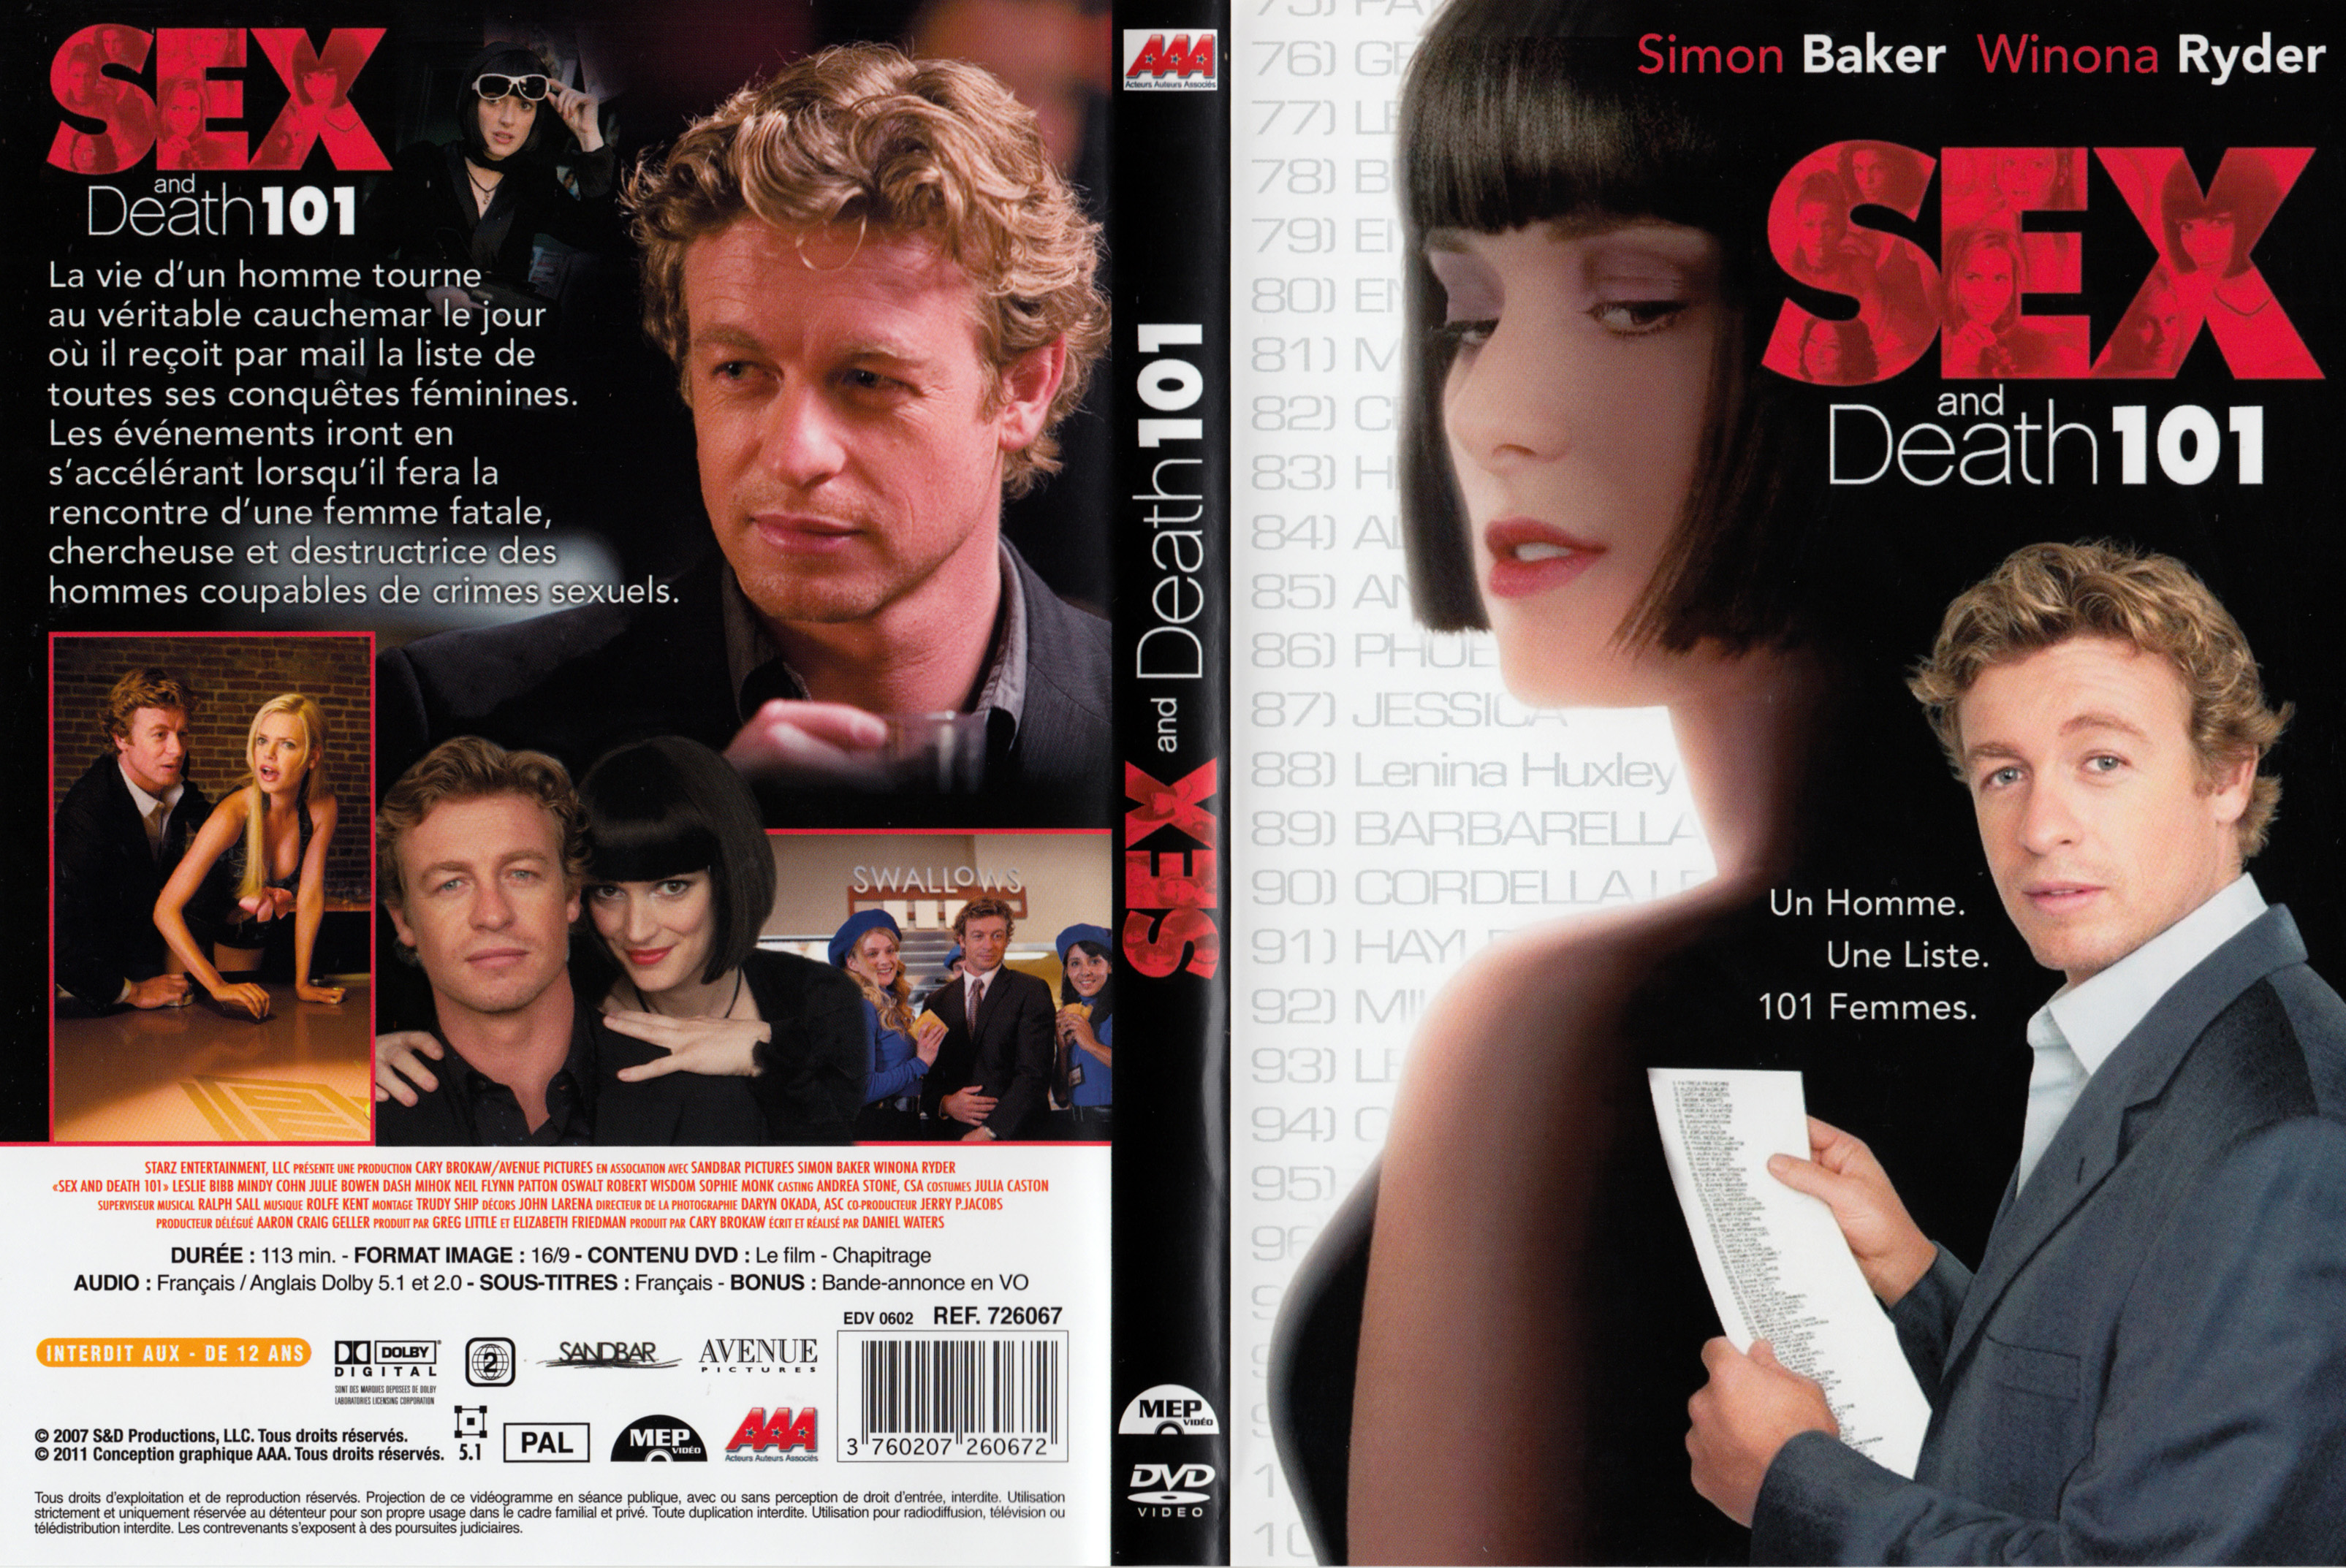 Jaquette DVD Sex and Death 101